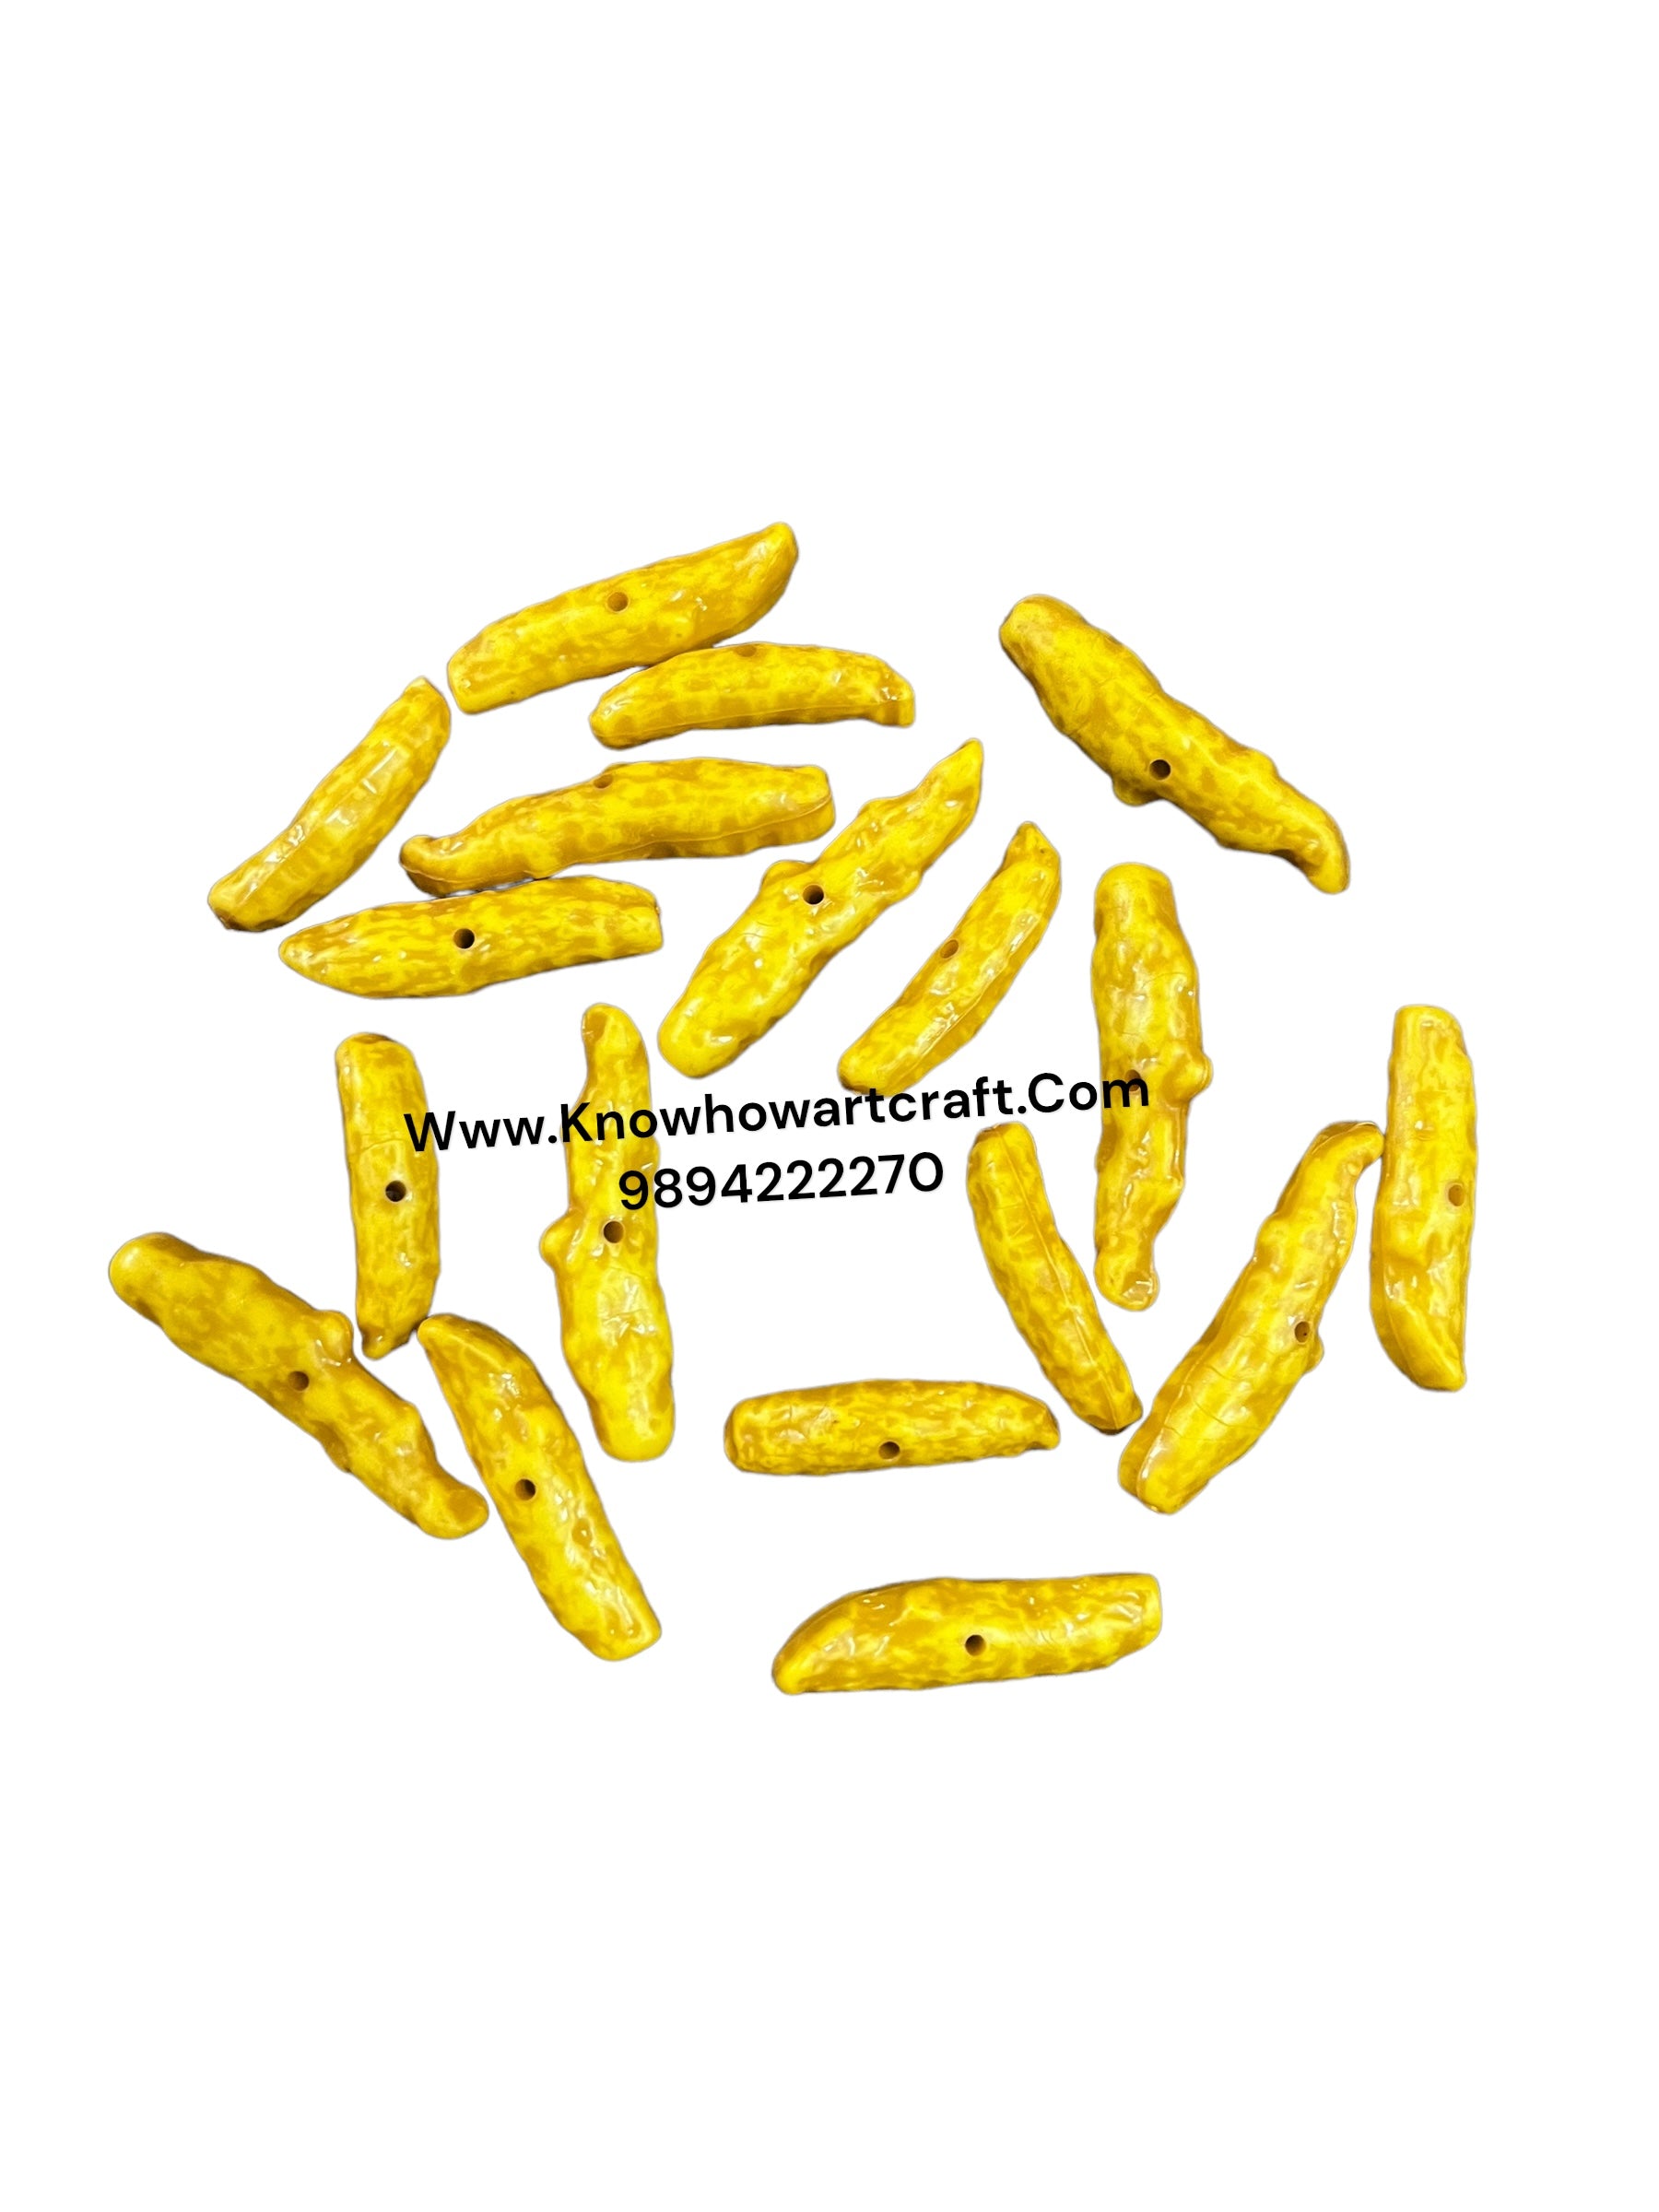 Turmeric  beads 50g in a pack